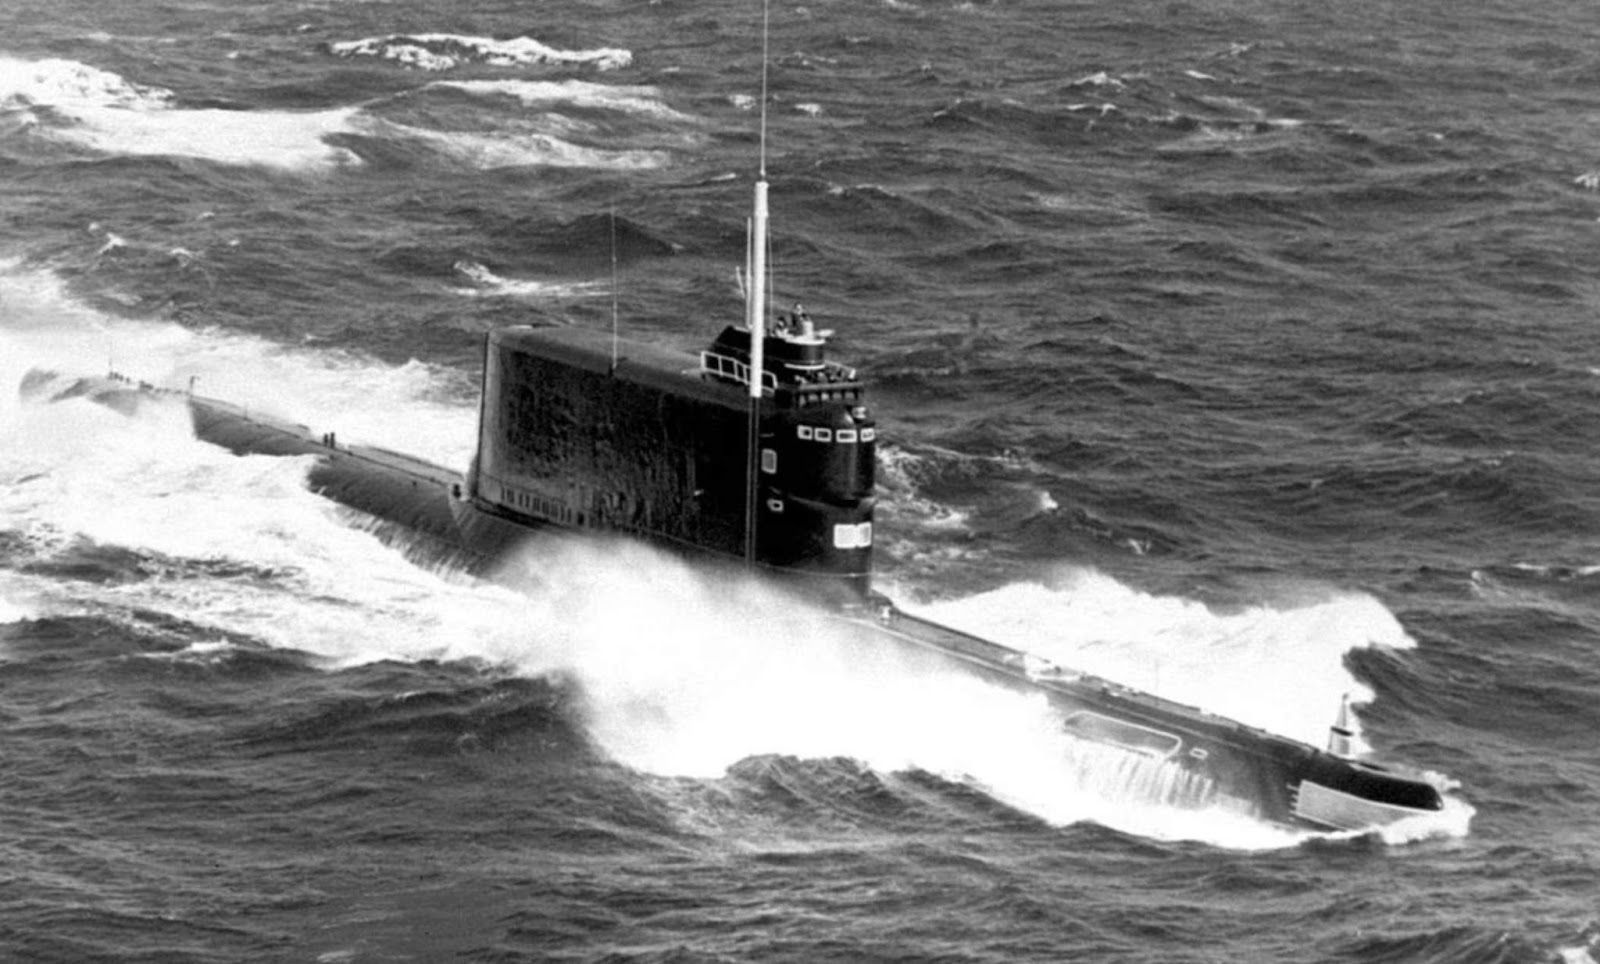 An aerial starboard bow view of a Soviet Golf II class ballistic missile submarine like the K-129